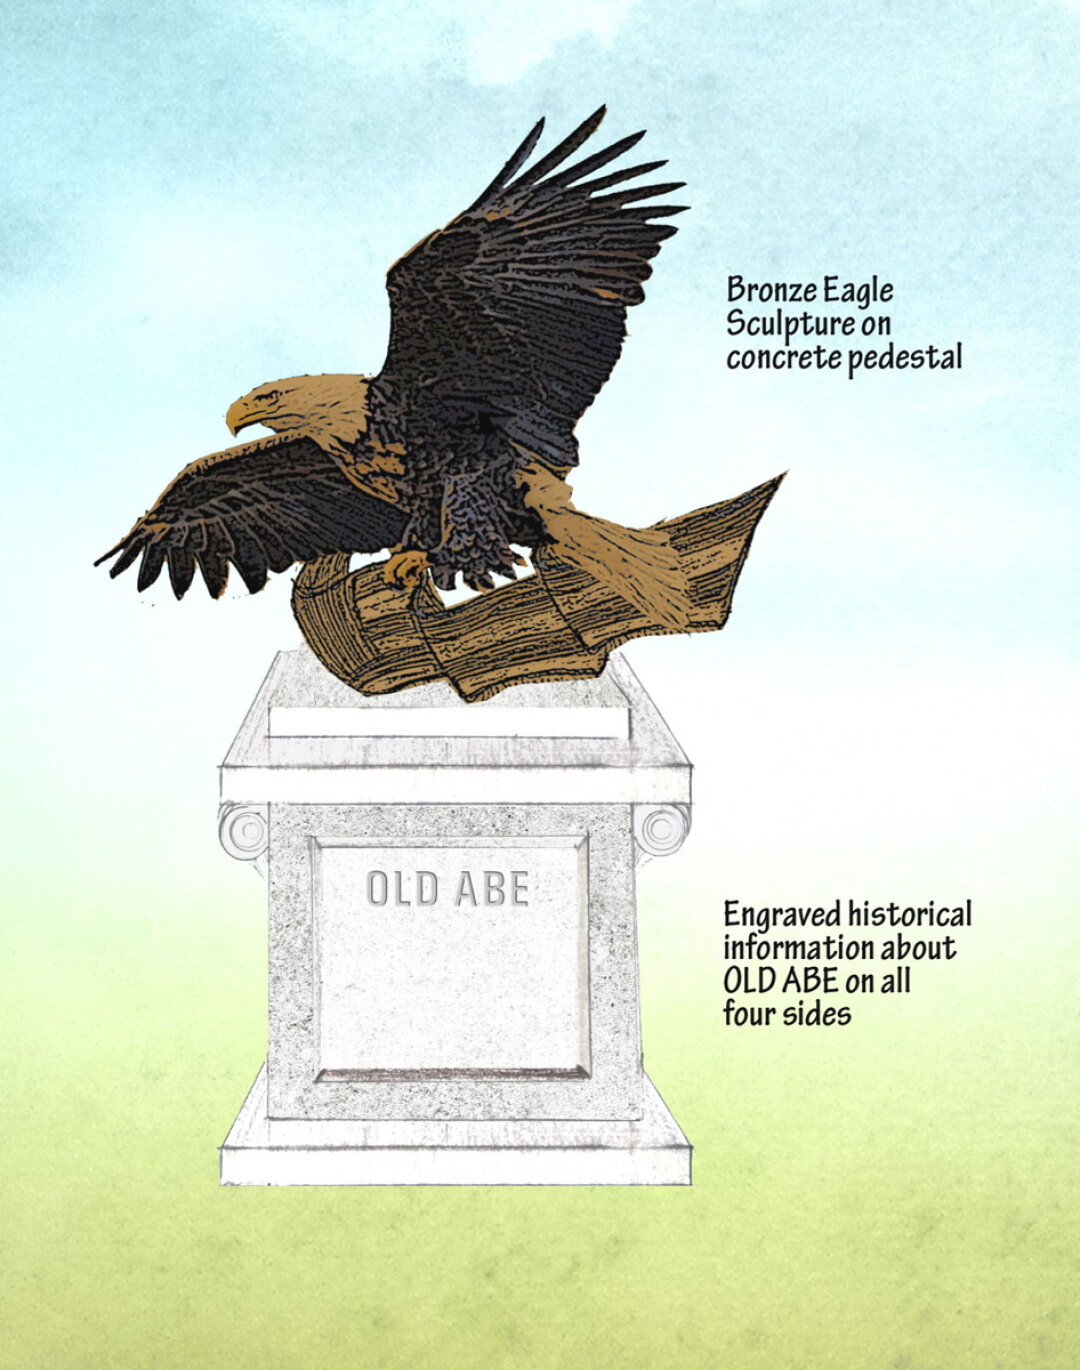 Plans to create a veterans memorial trail in downtown Eau Claire include a statue of Old Abe, the legendary (but real!) bald eagle who accompanied Wisconsin troops during the Civil War.